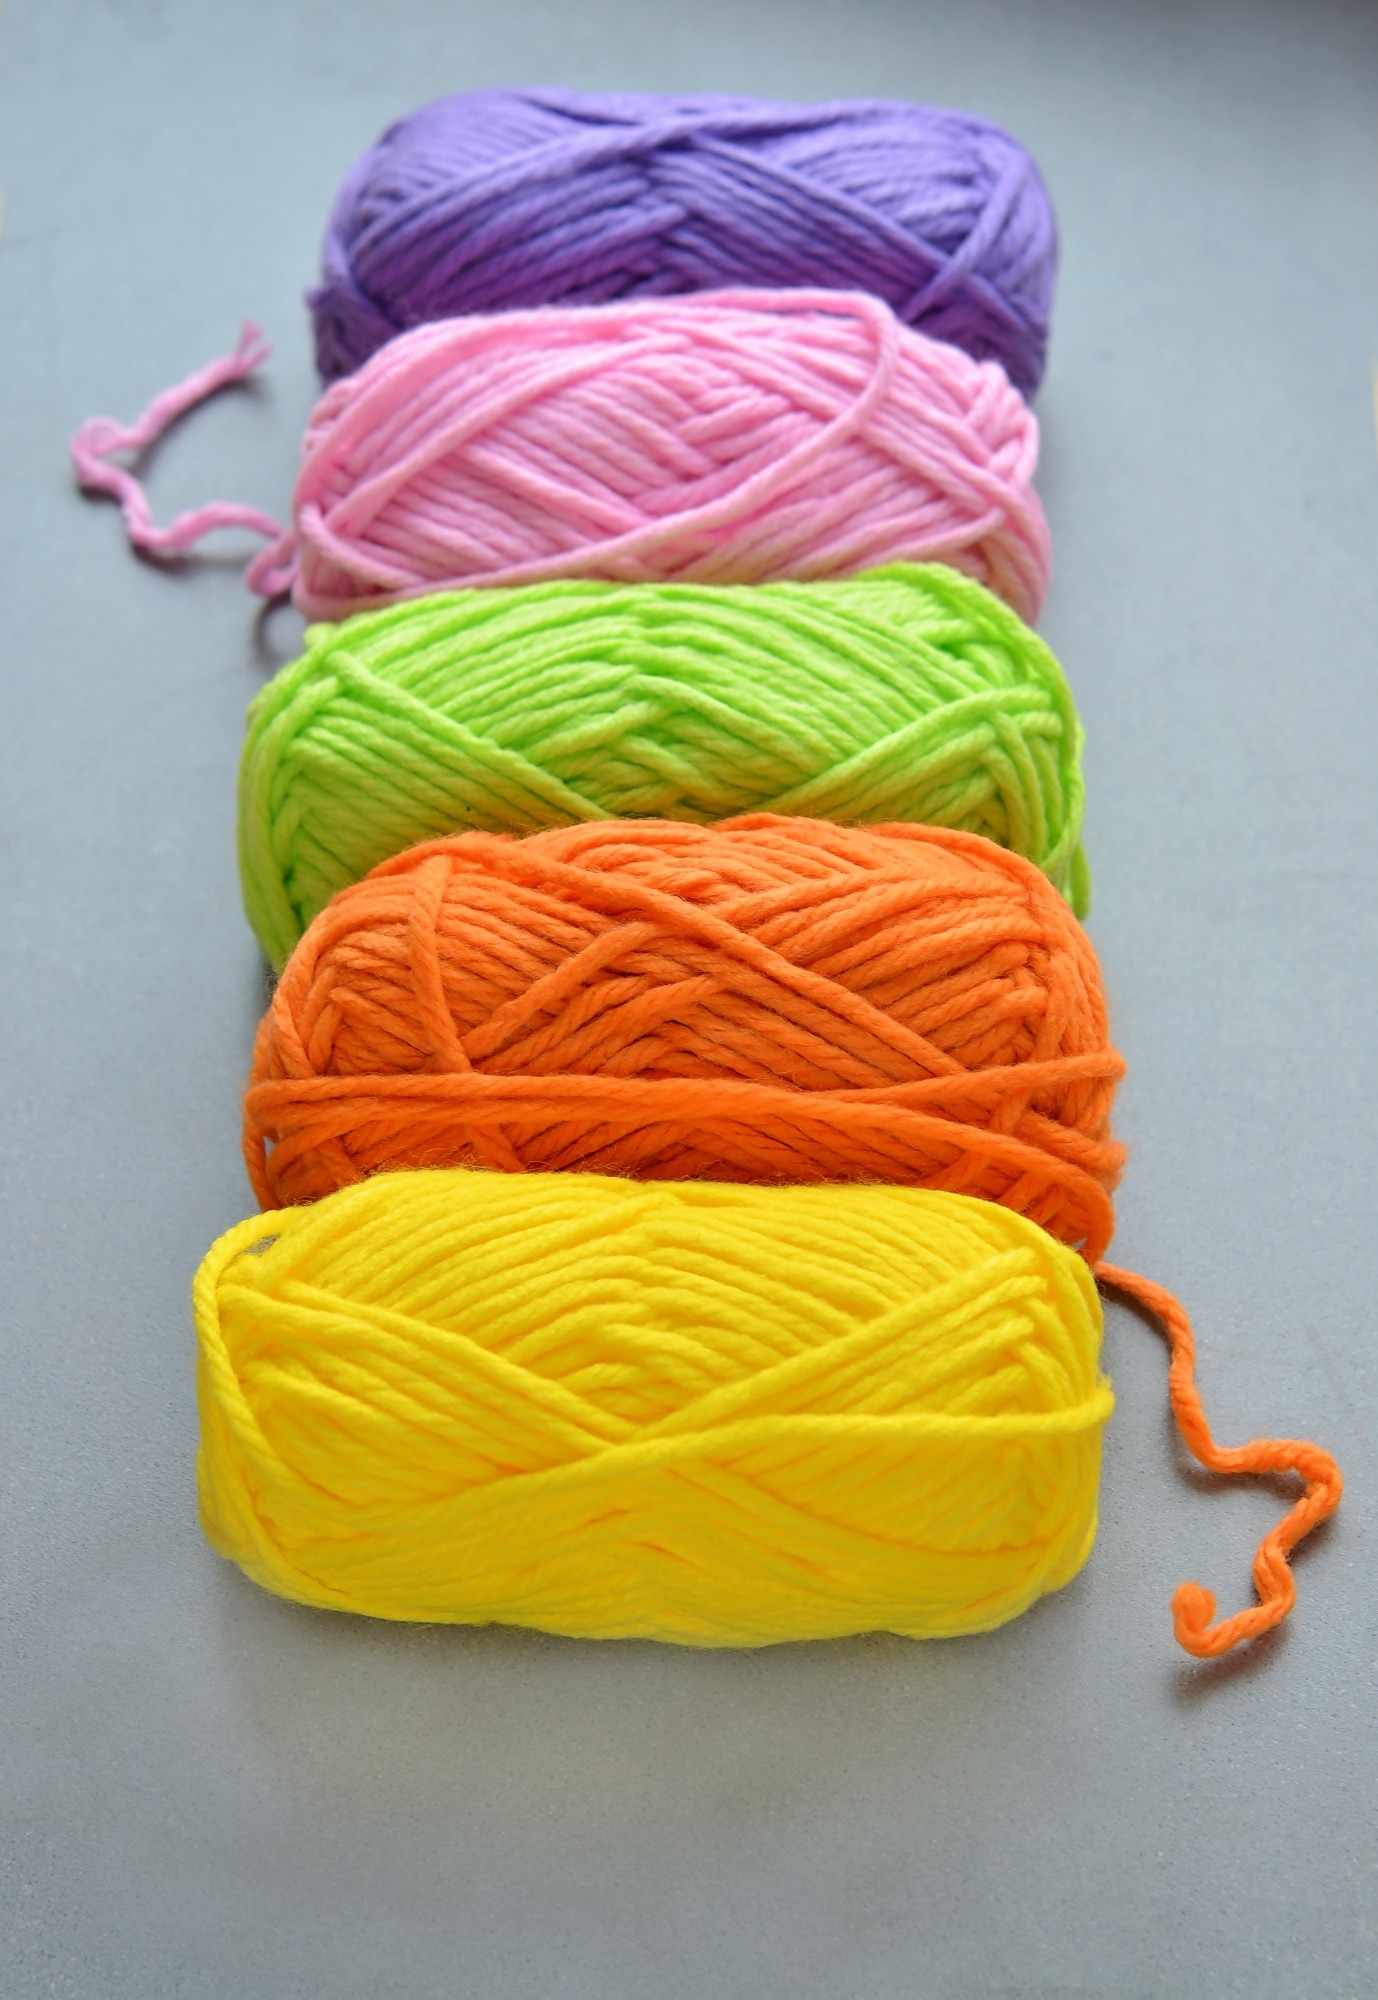 5 assorted color yarns